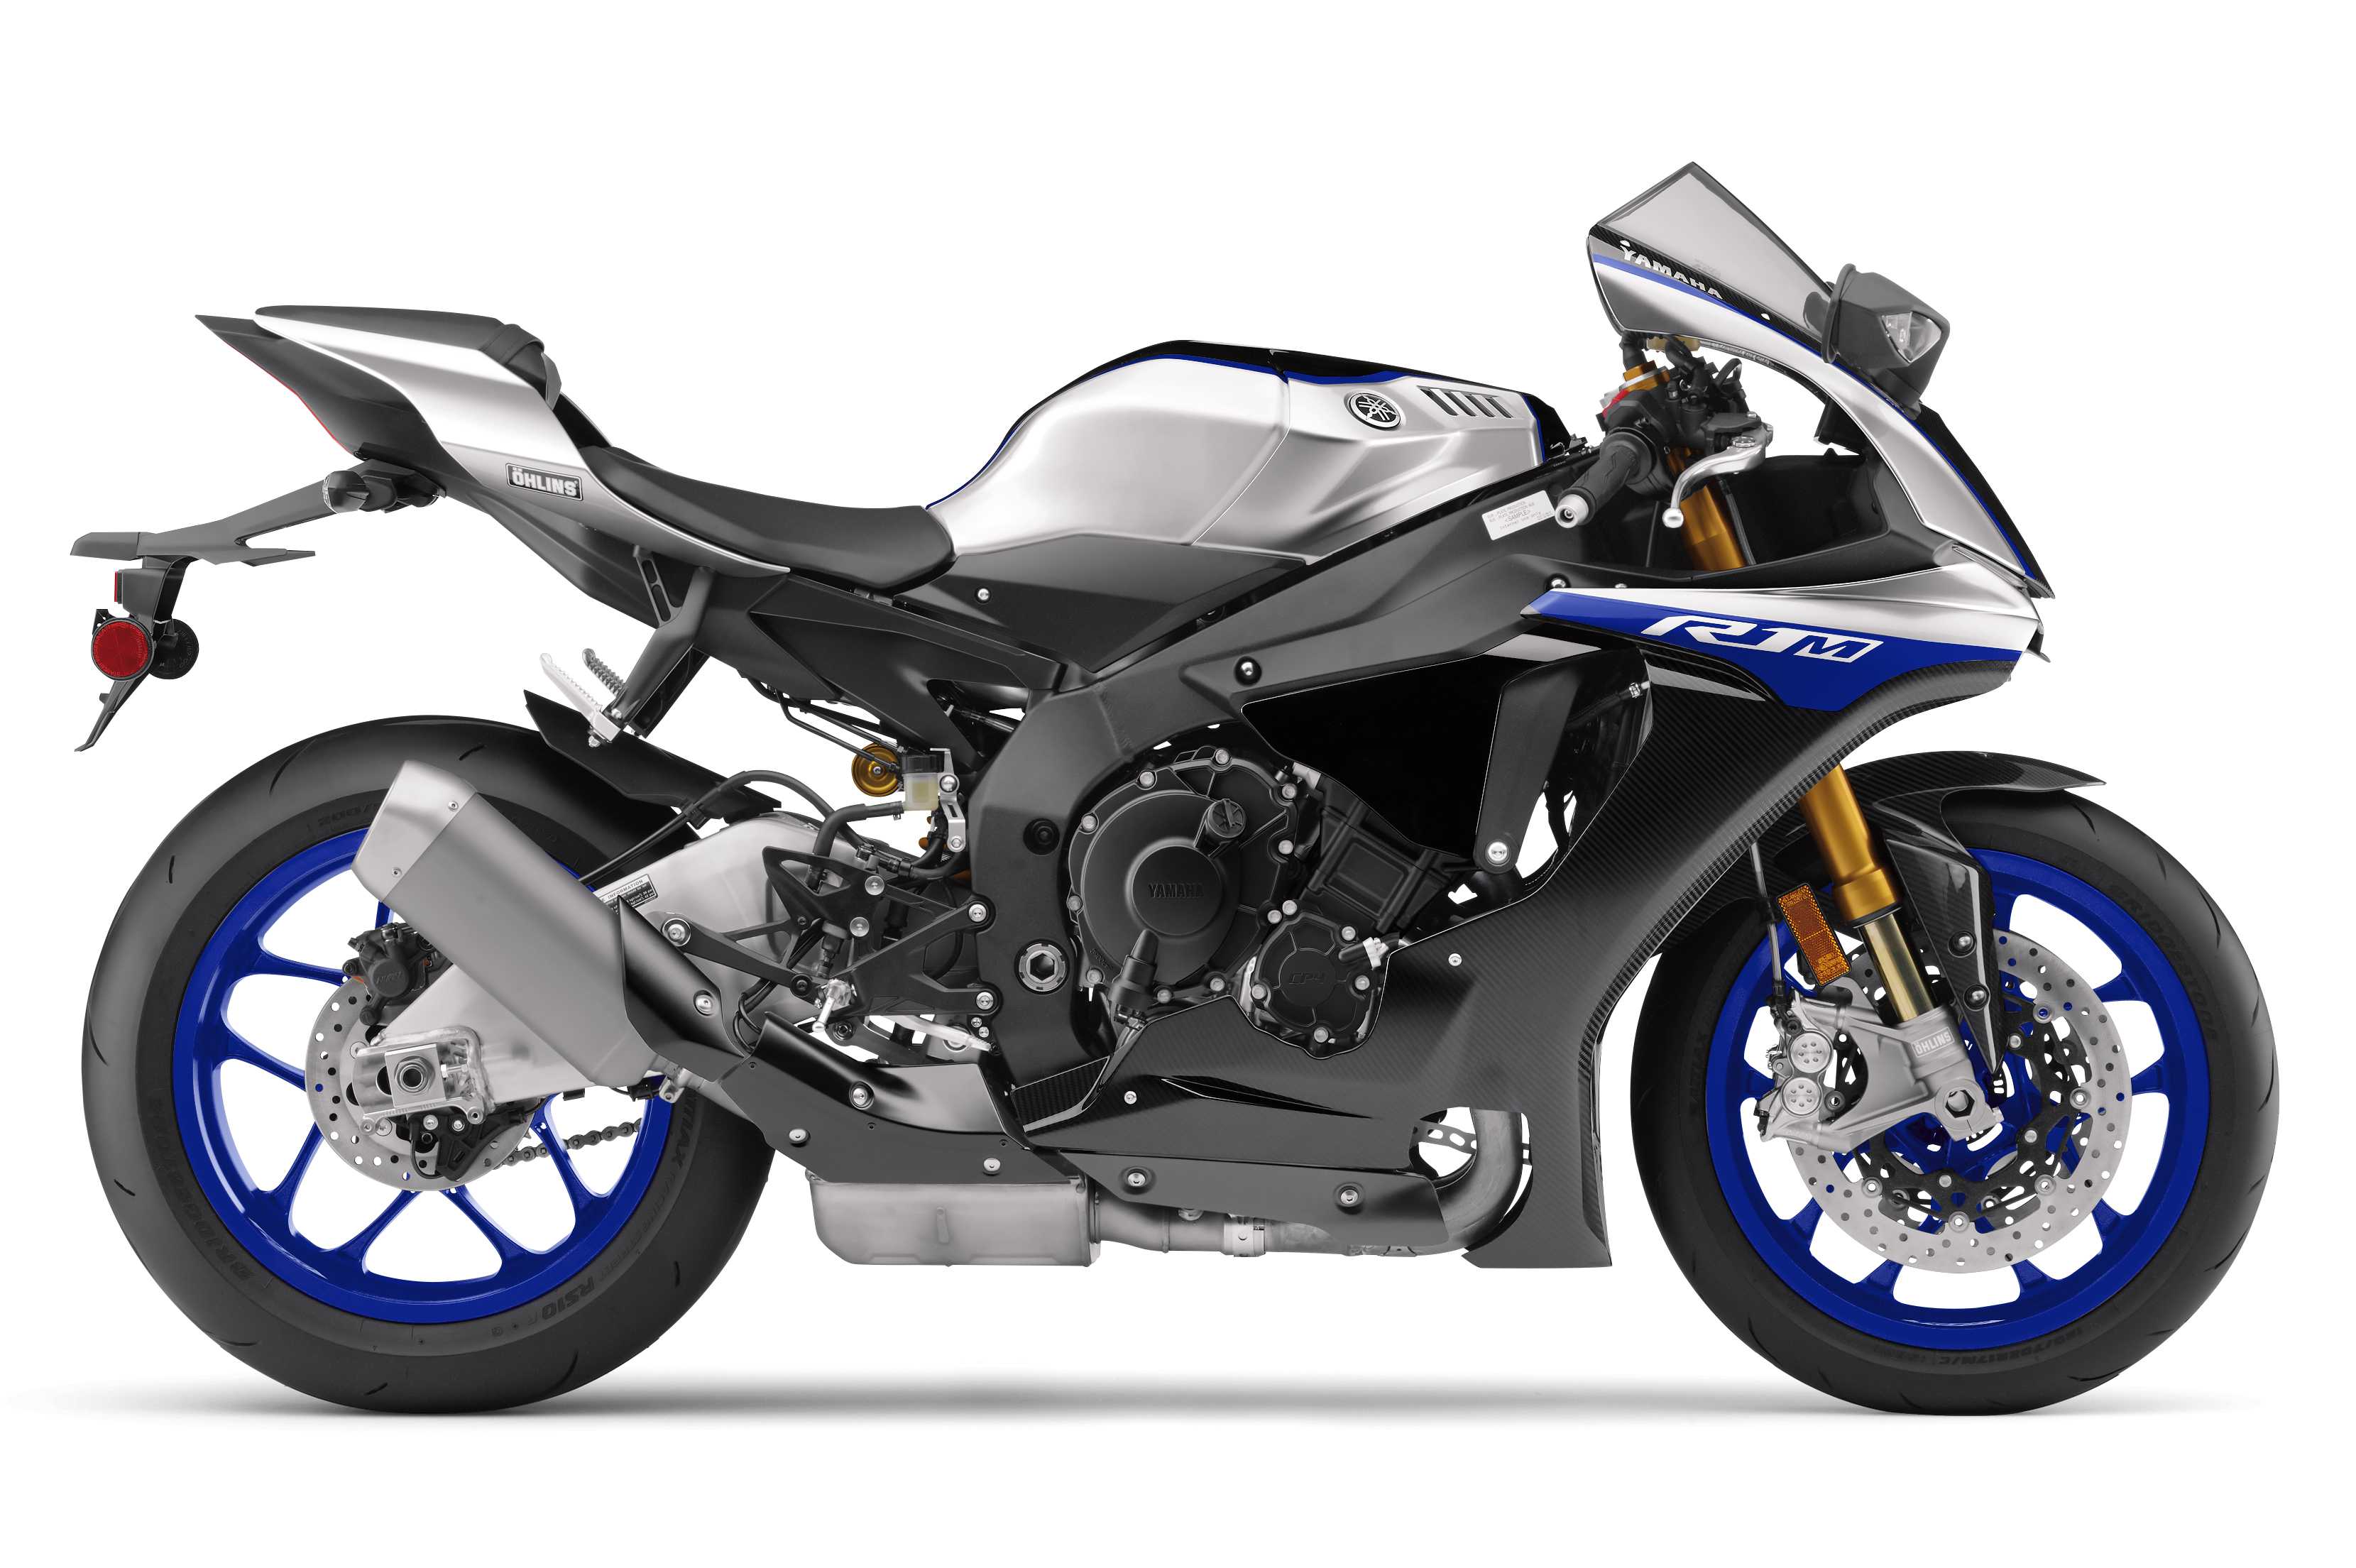 Highlights from the 2016 Yamaha Motorcycle Lineup